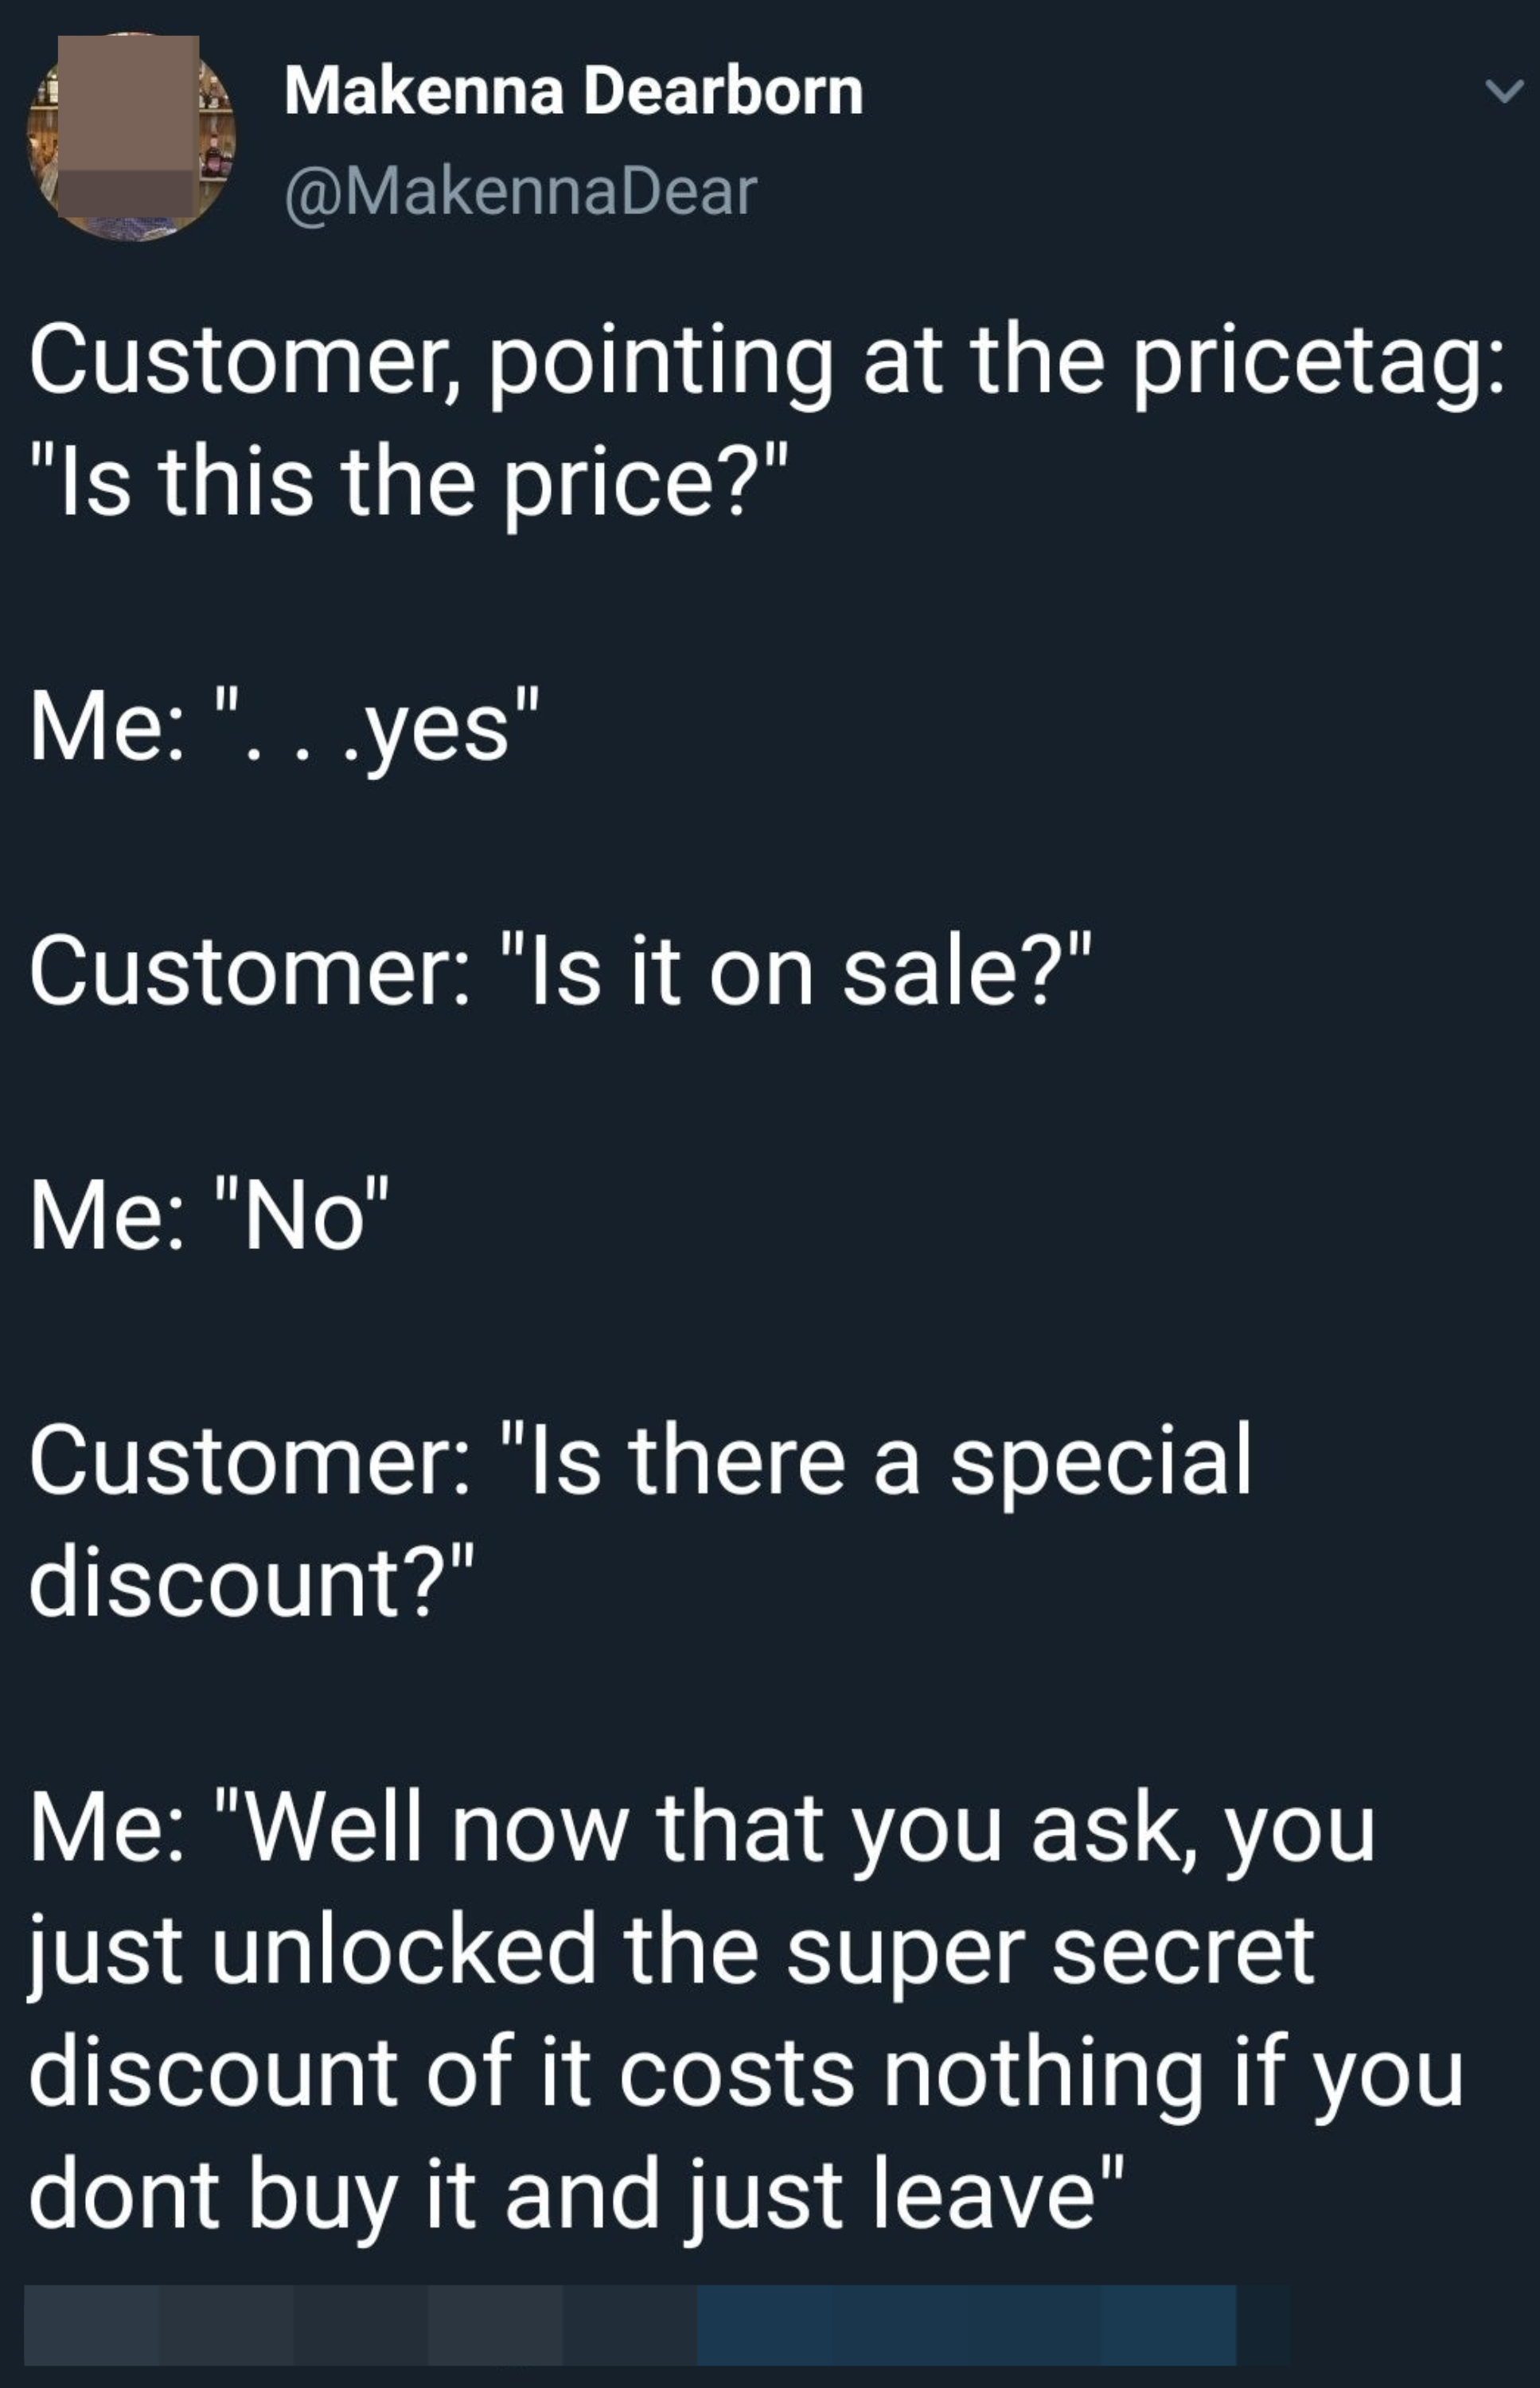 tweet about a customer who does not understand something is not on sale